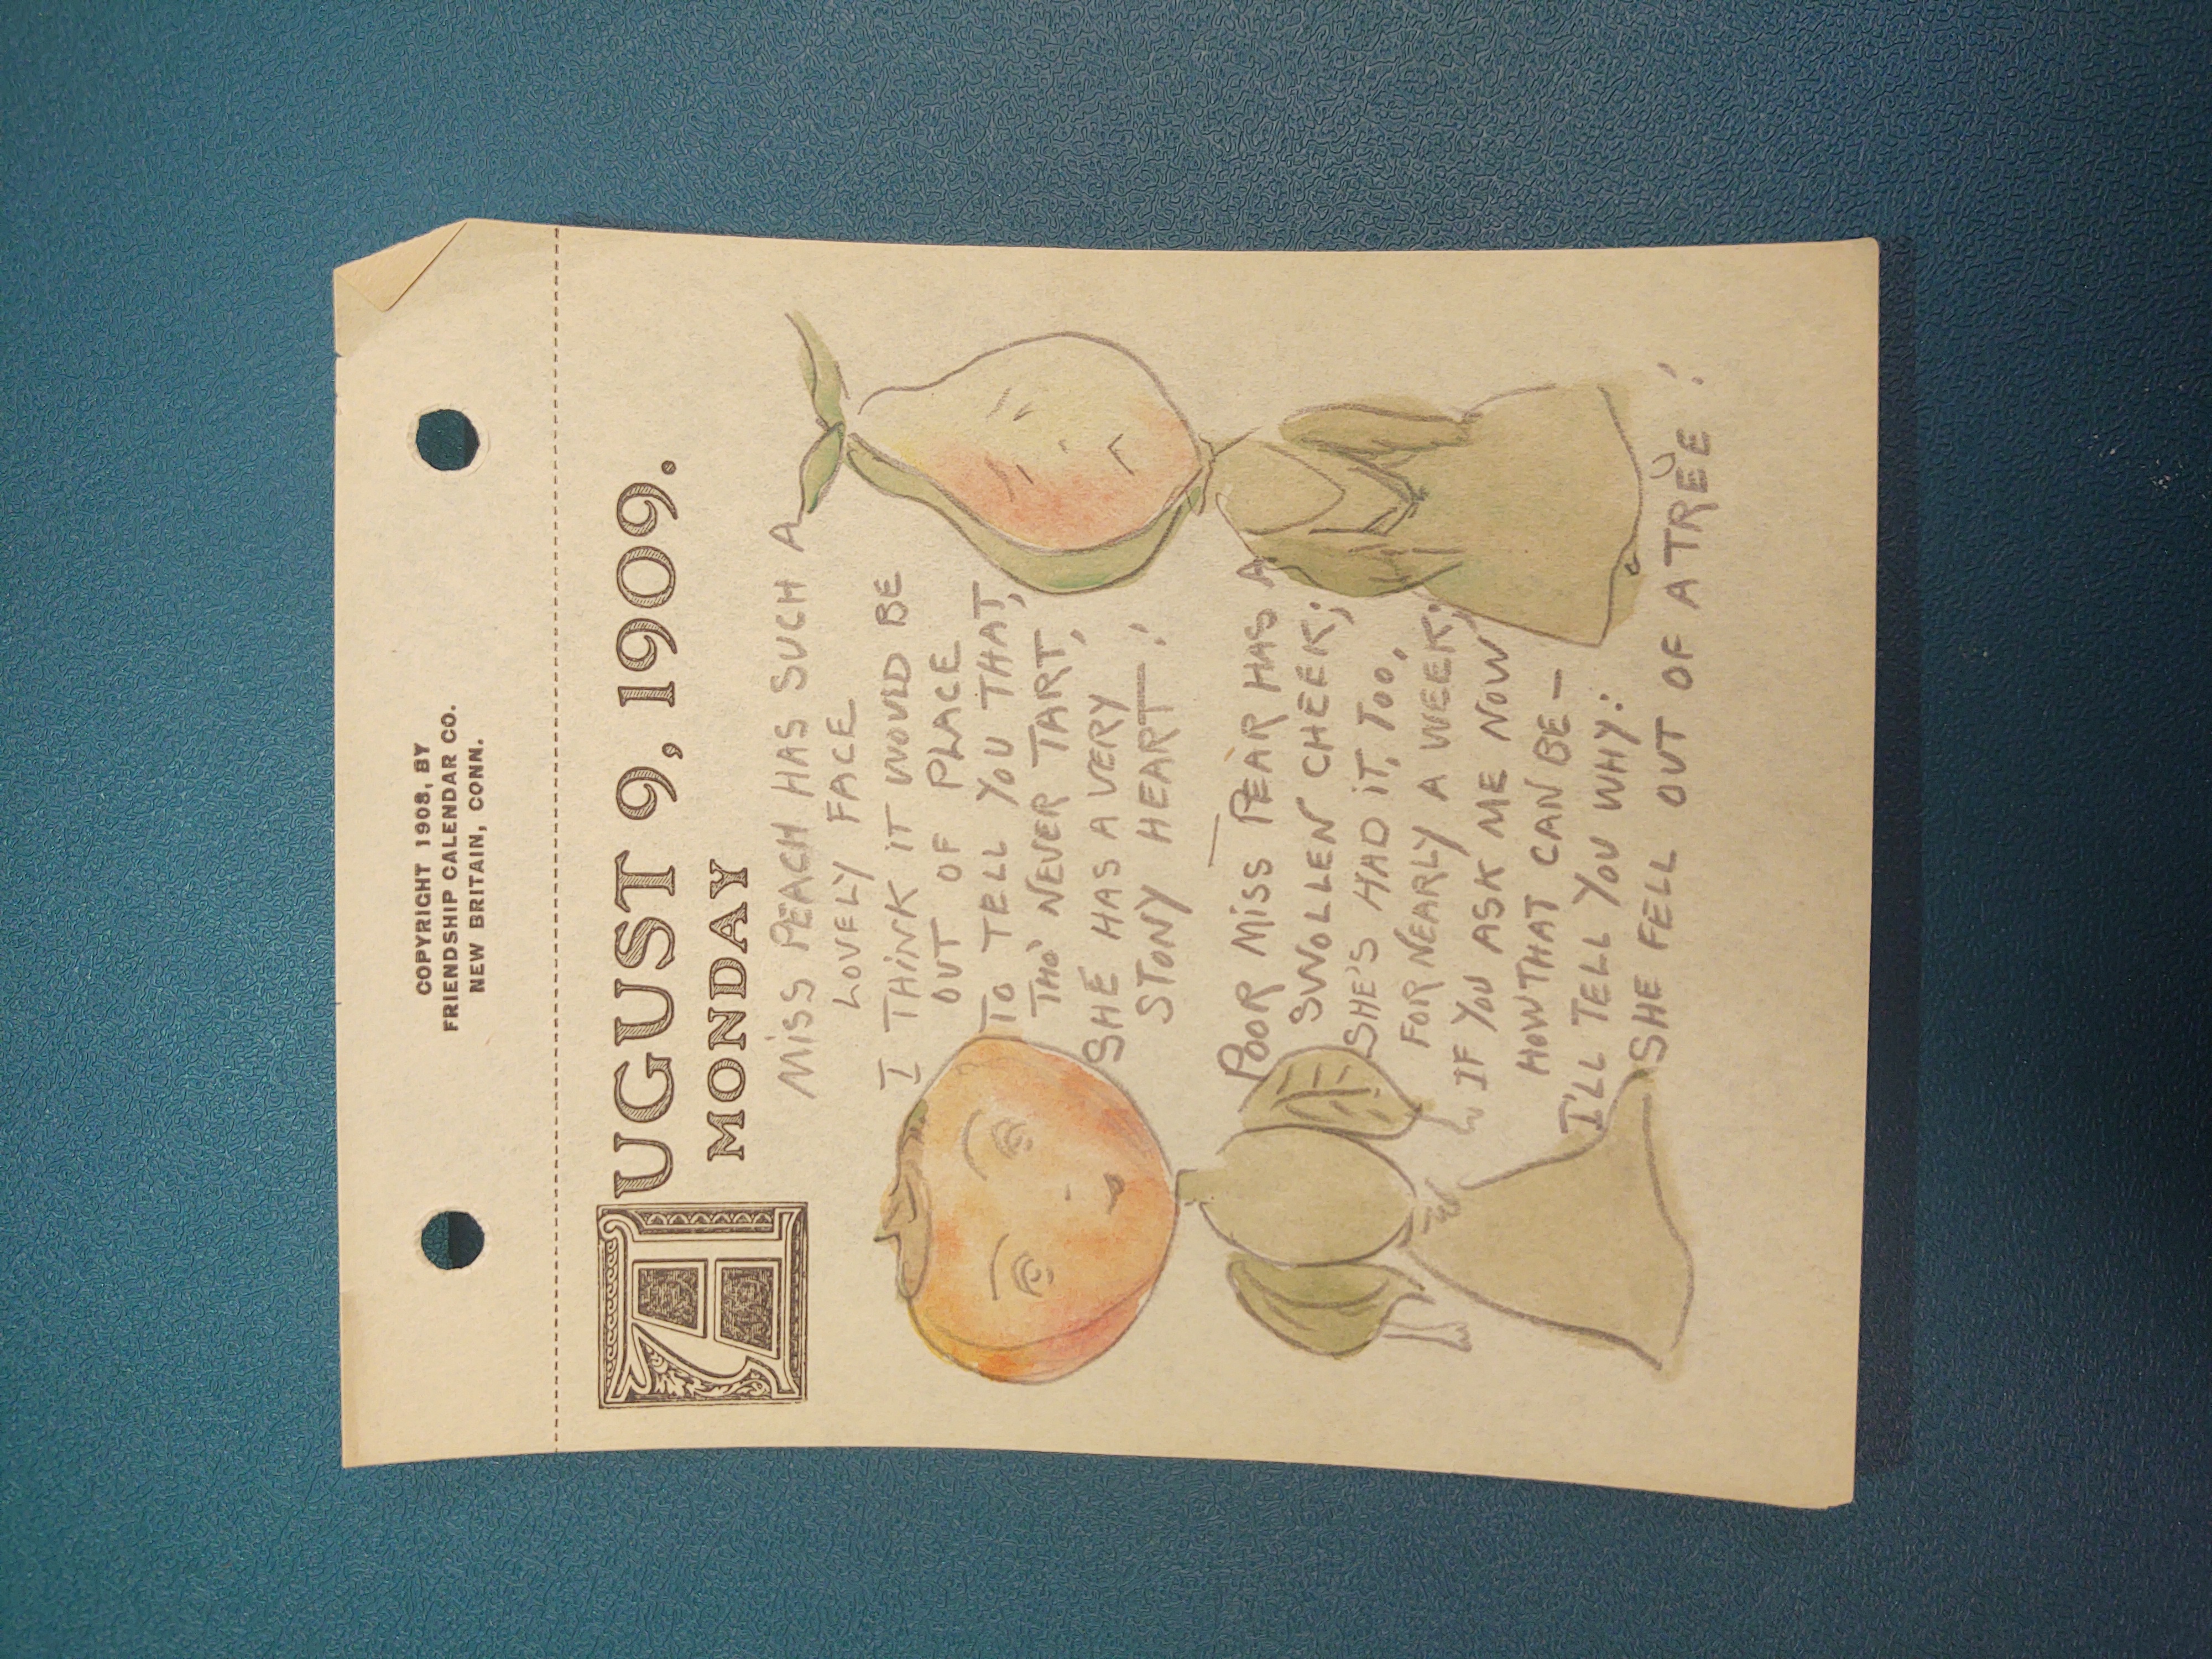 August 9, 1909. Monday: An anthropomorphic peach or tomato lady is on the left of the page and a pear lady is drawn on the right. They are made with pencil and watercolor, and the text is about them.